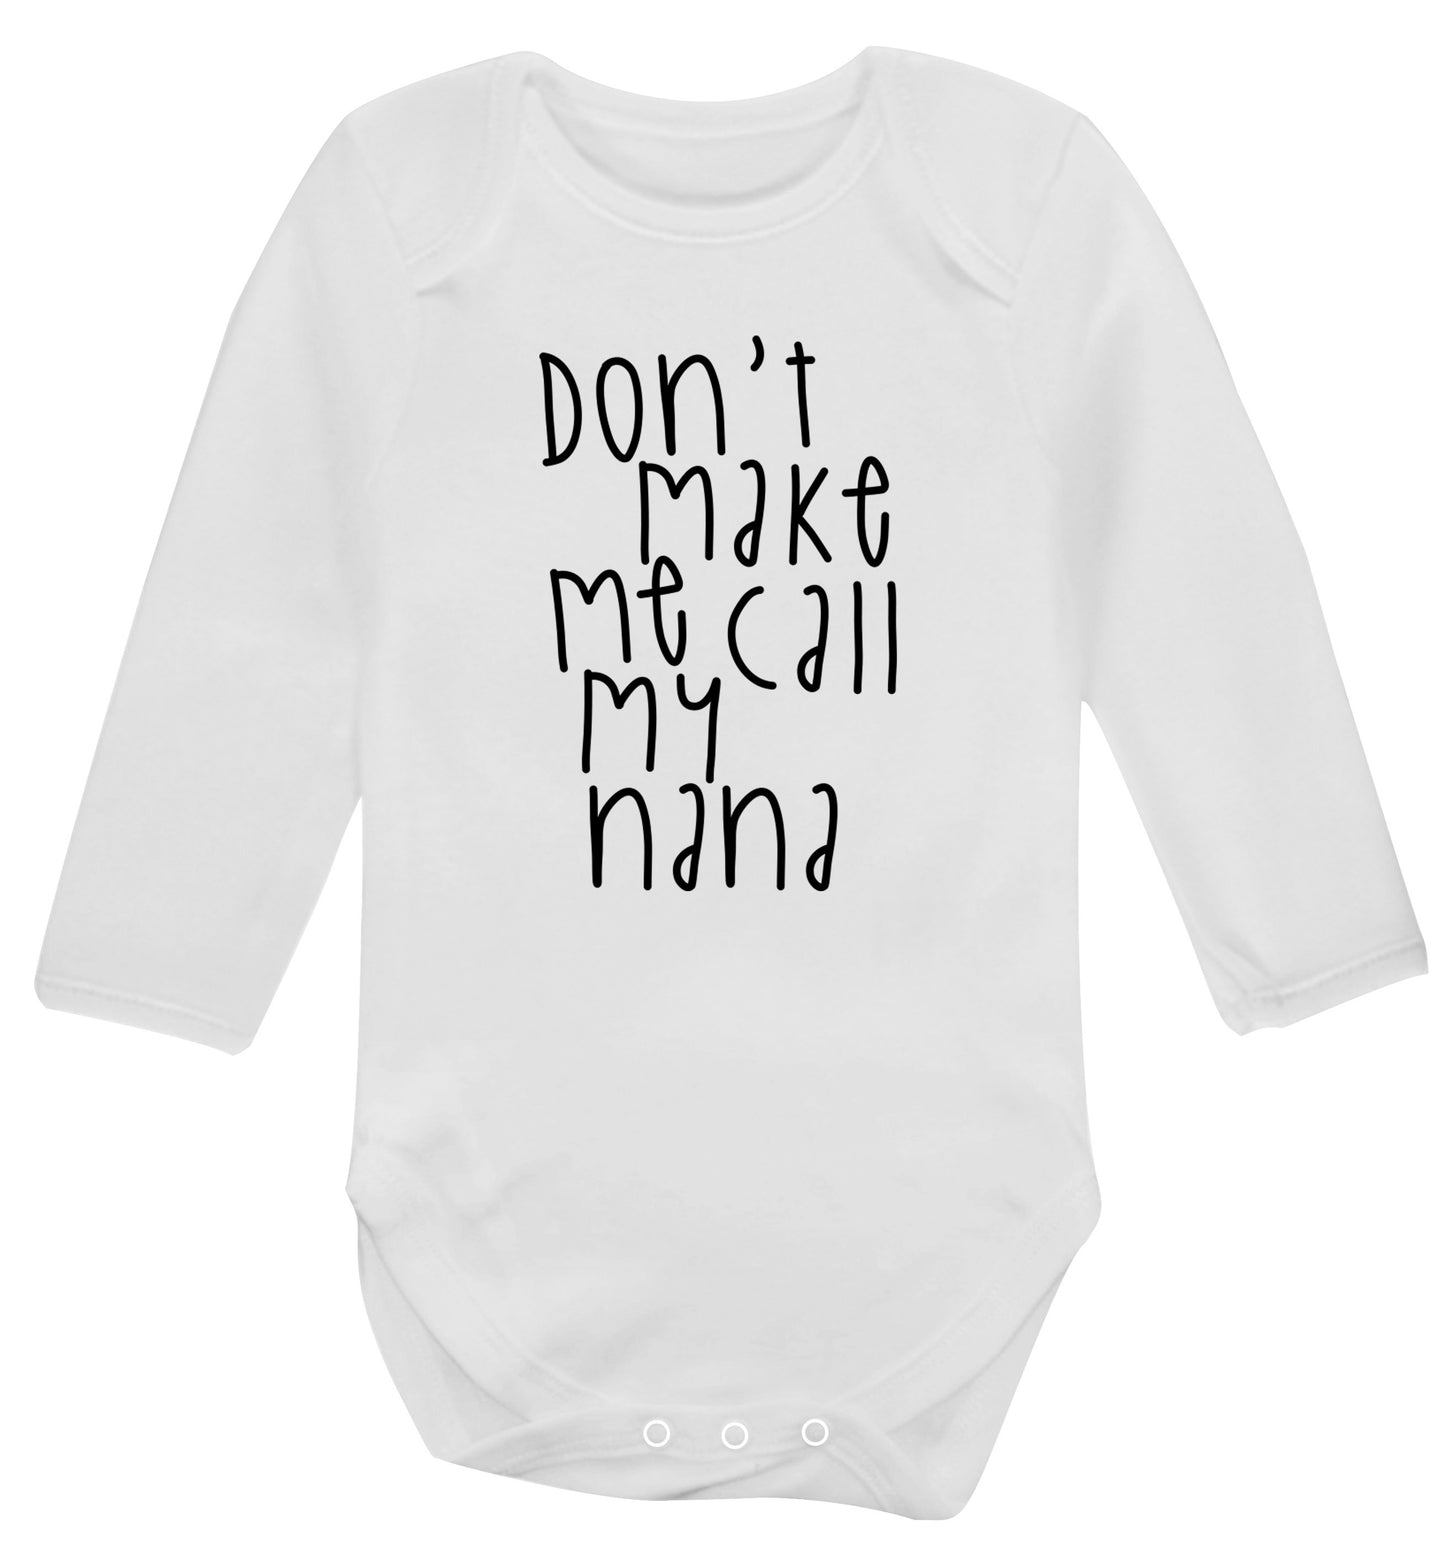 Don't make me call my nana Baby Vest long sleeved white 6-12 months